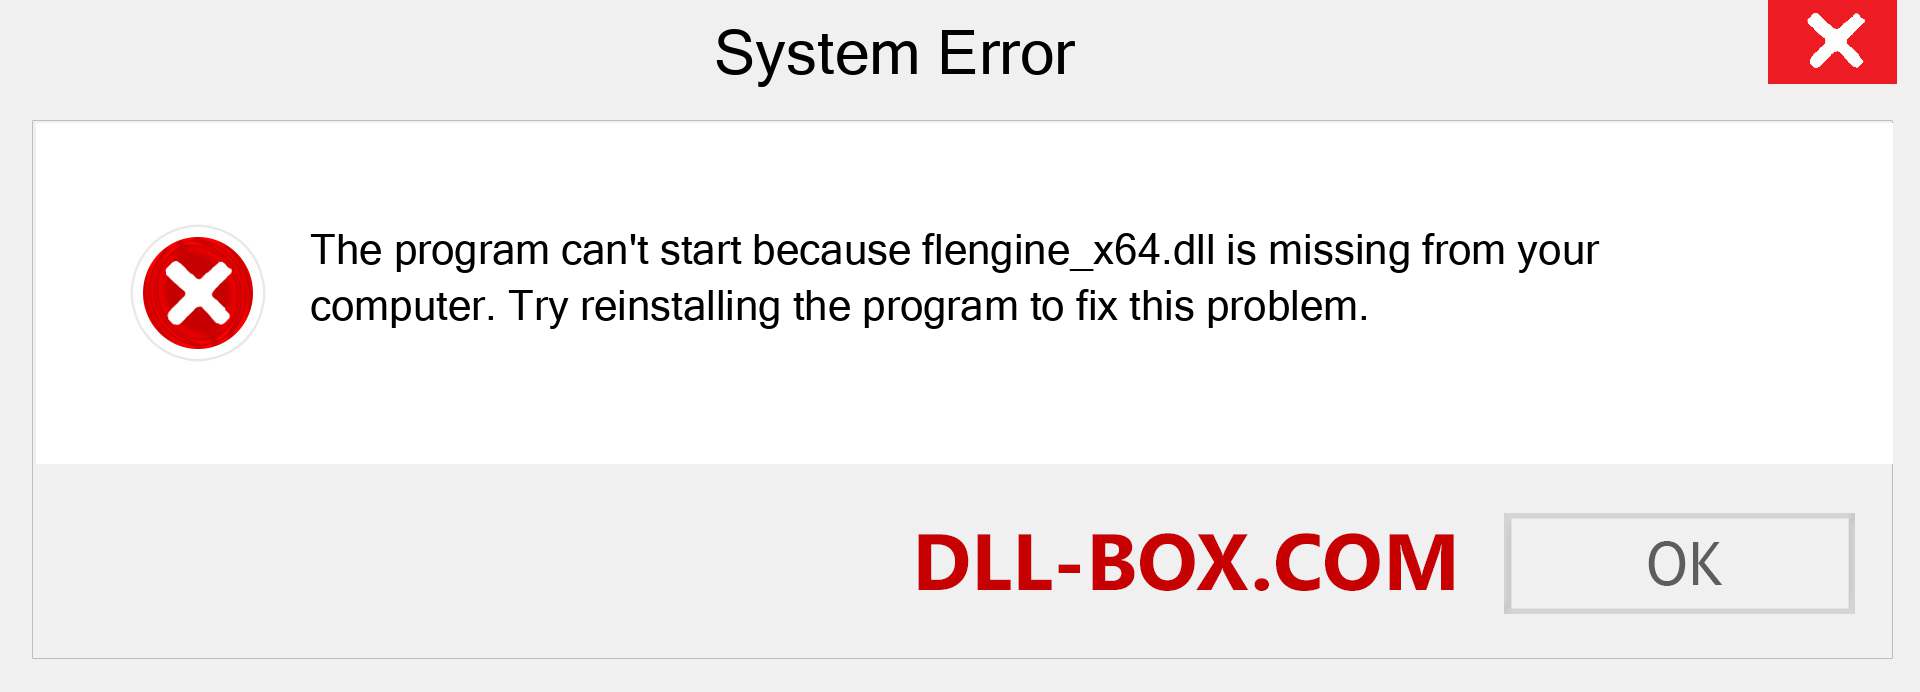  flengine_x64.dll file is missing?. Download for Windows 7, 8, 10 - Fix  flengine_x64 dll Missing Error on Windows, photos, images